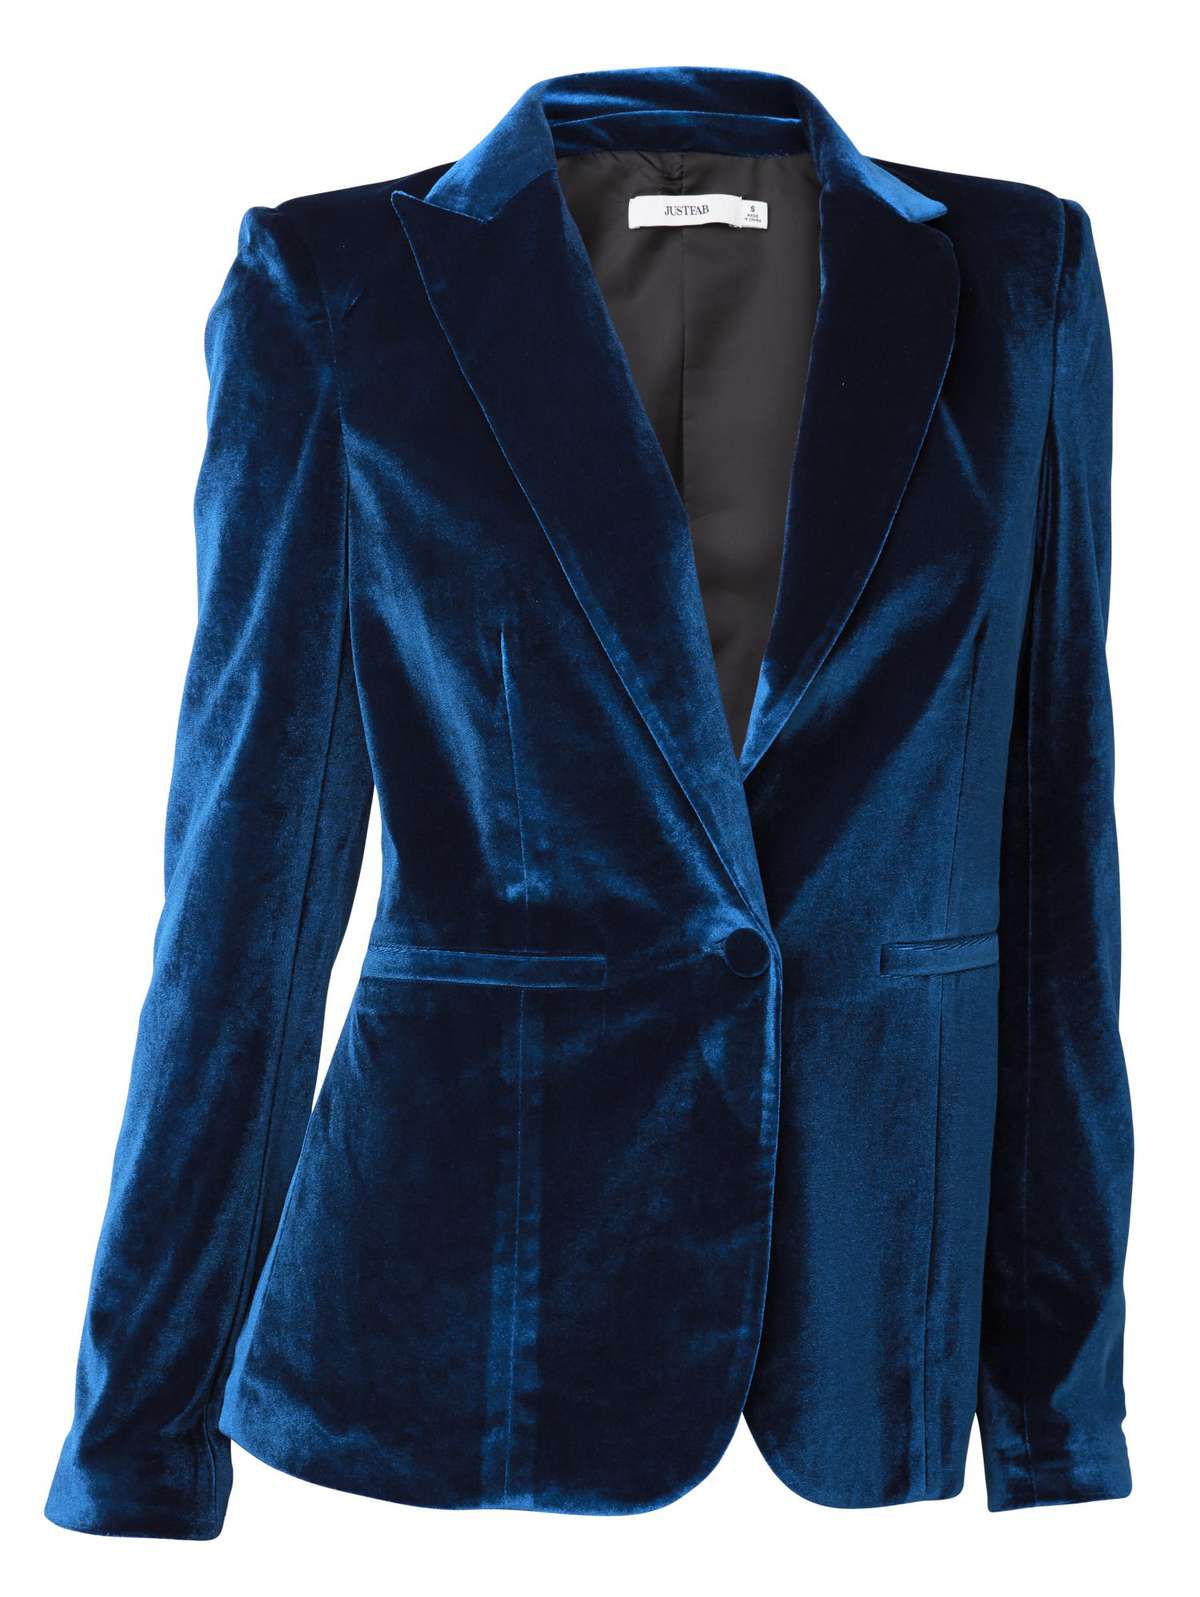 The blazer that will always make you look pulled together by JustFab